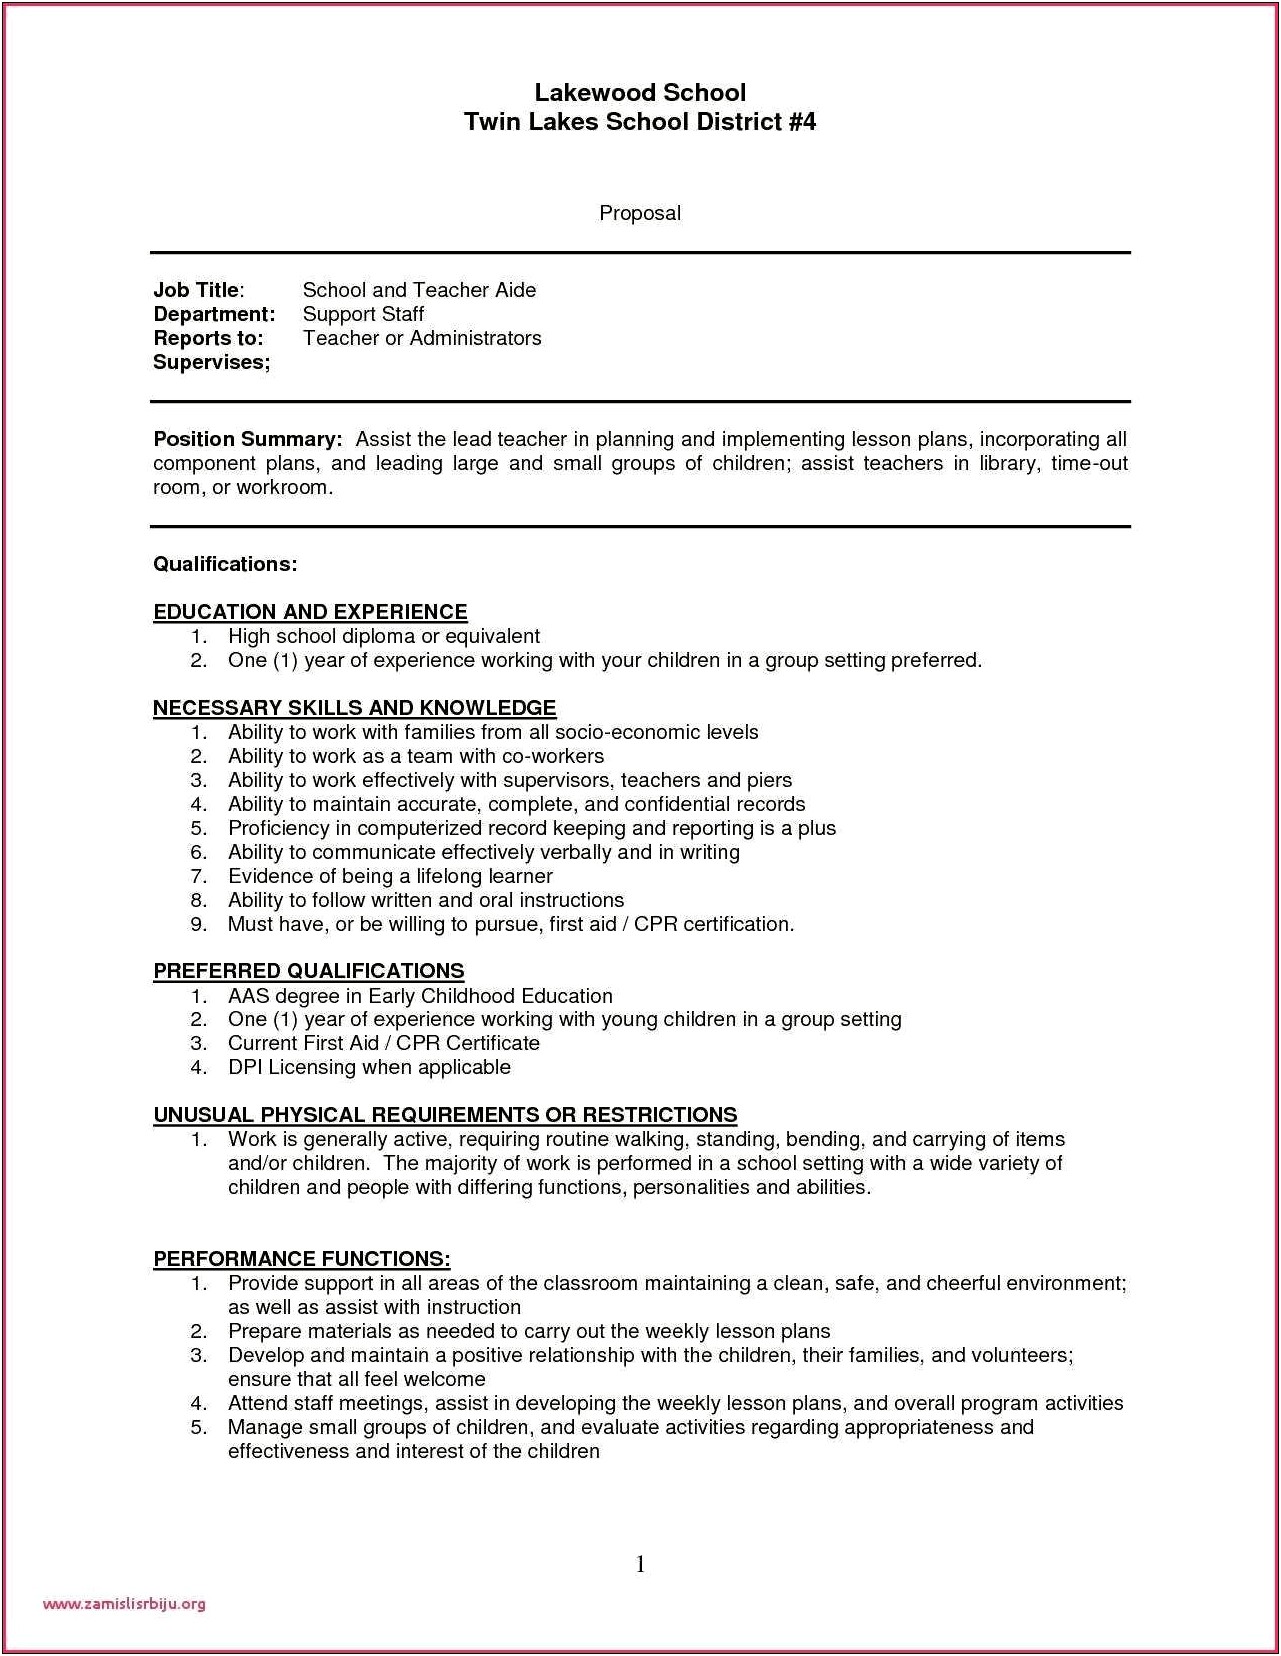 Example Resume With Cpr Certification